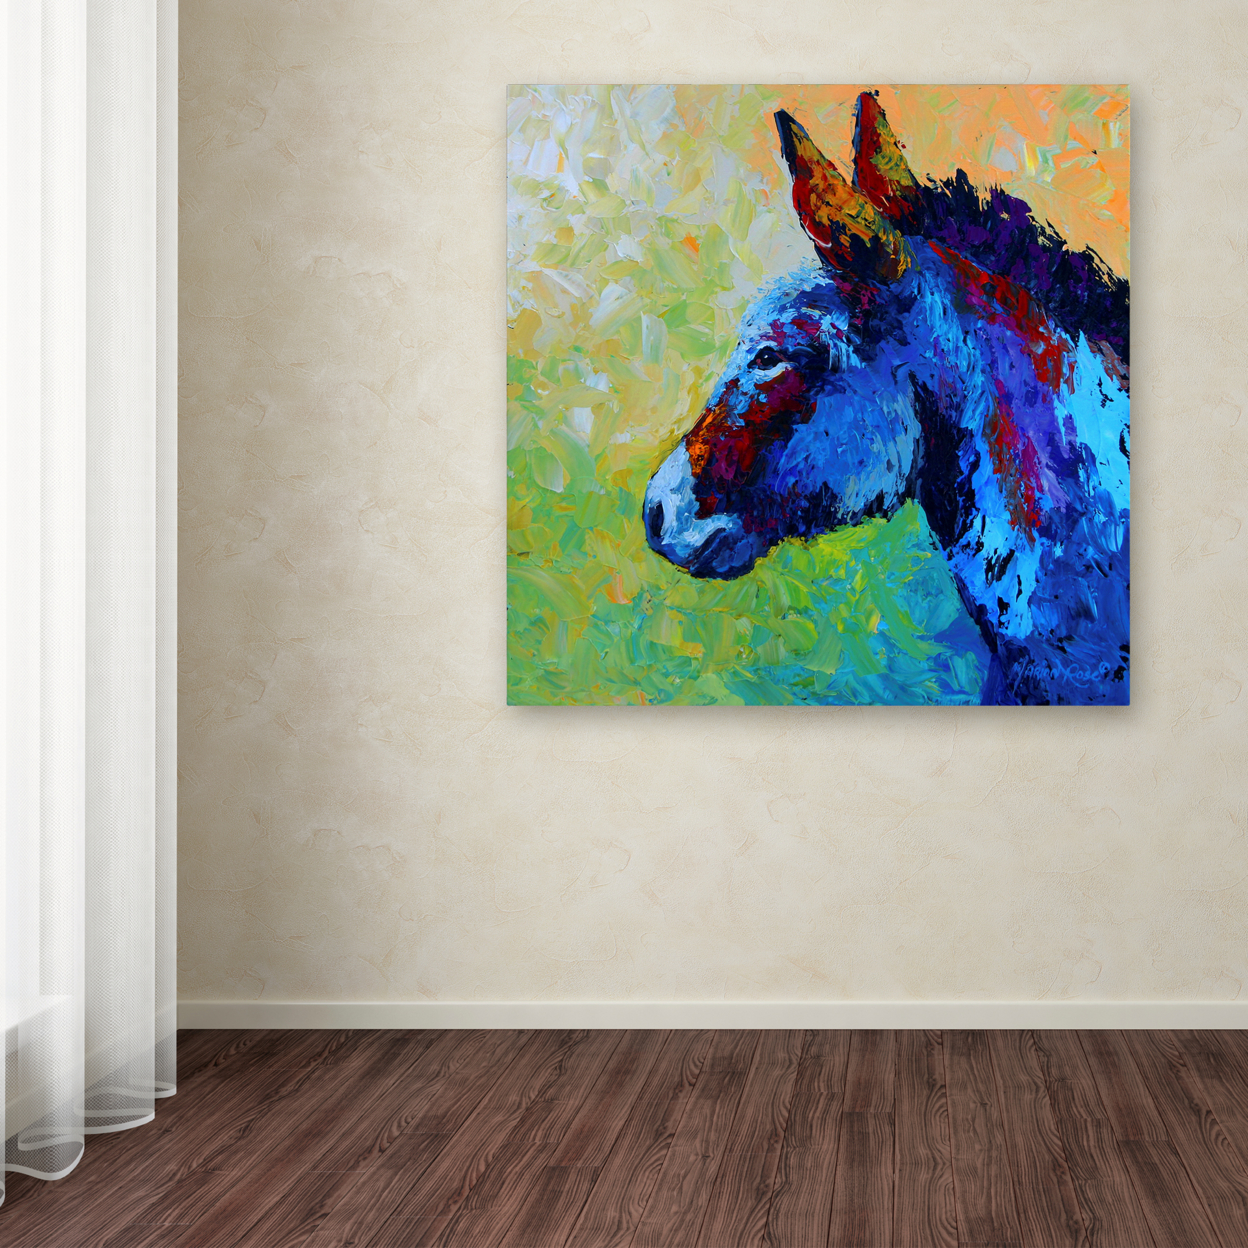 Marion Rose 'Burro' Ready To Hang Canvas Art 35 X 35 Inches Made In USA